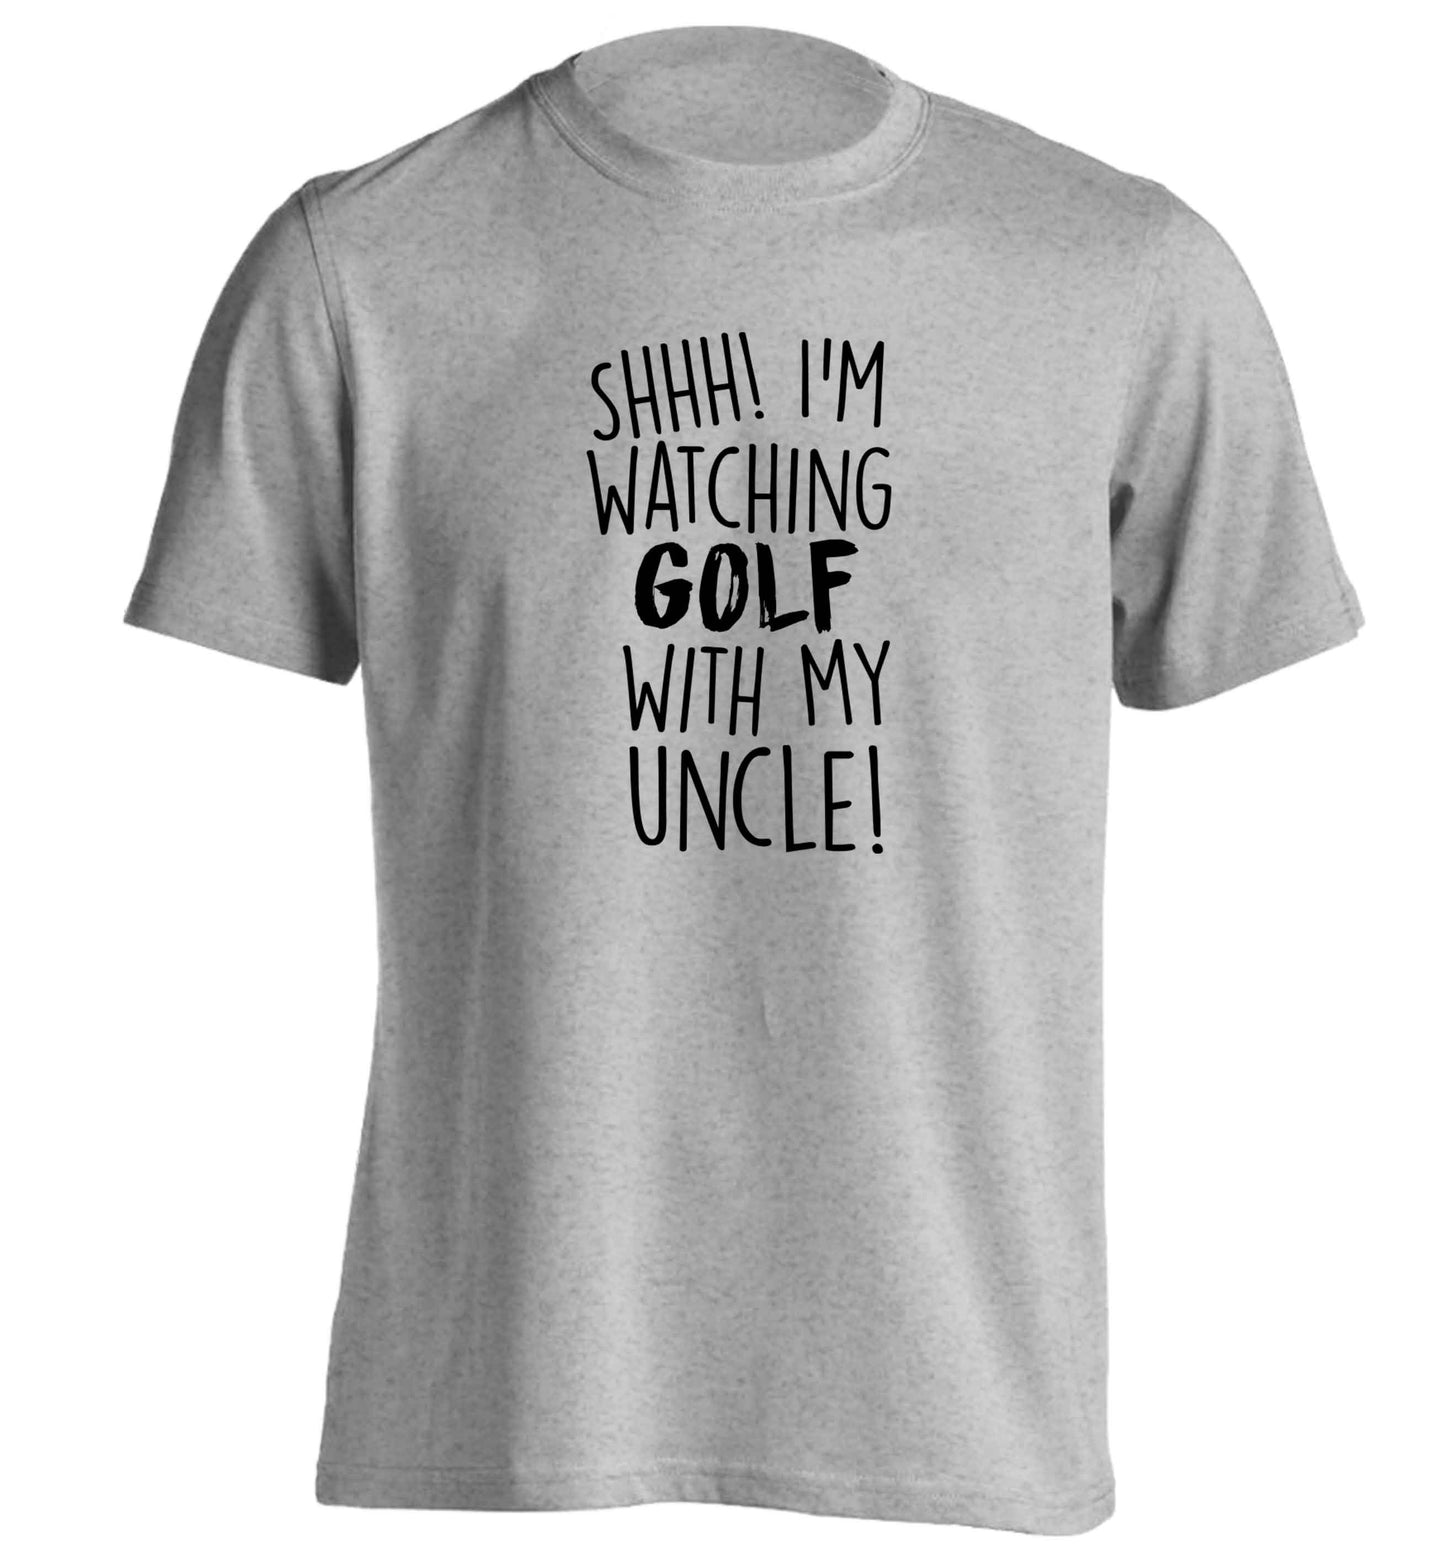 Shh I'm watching golf with my uncle adults unisex grey Tshirt 2XL